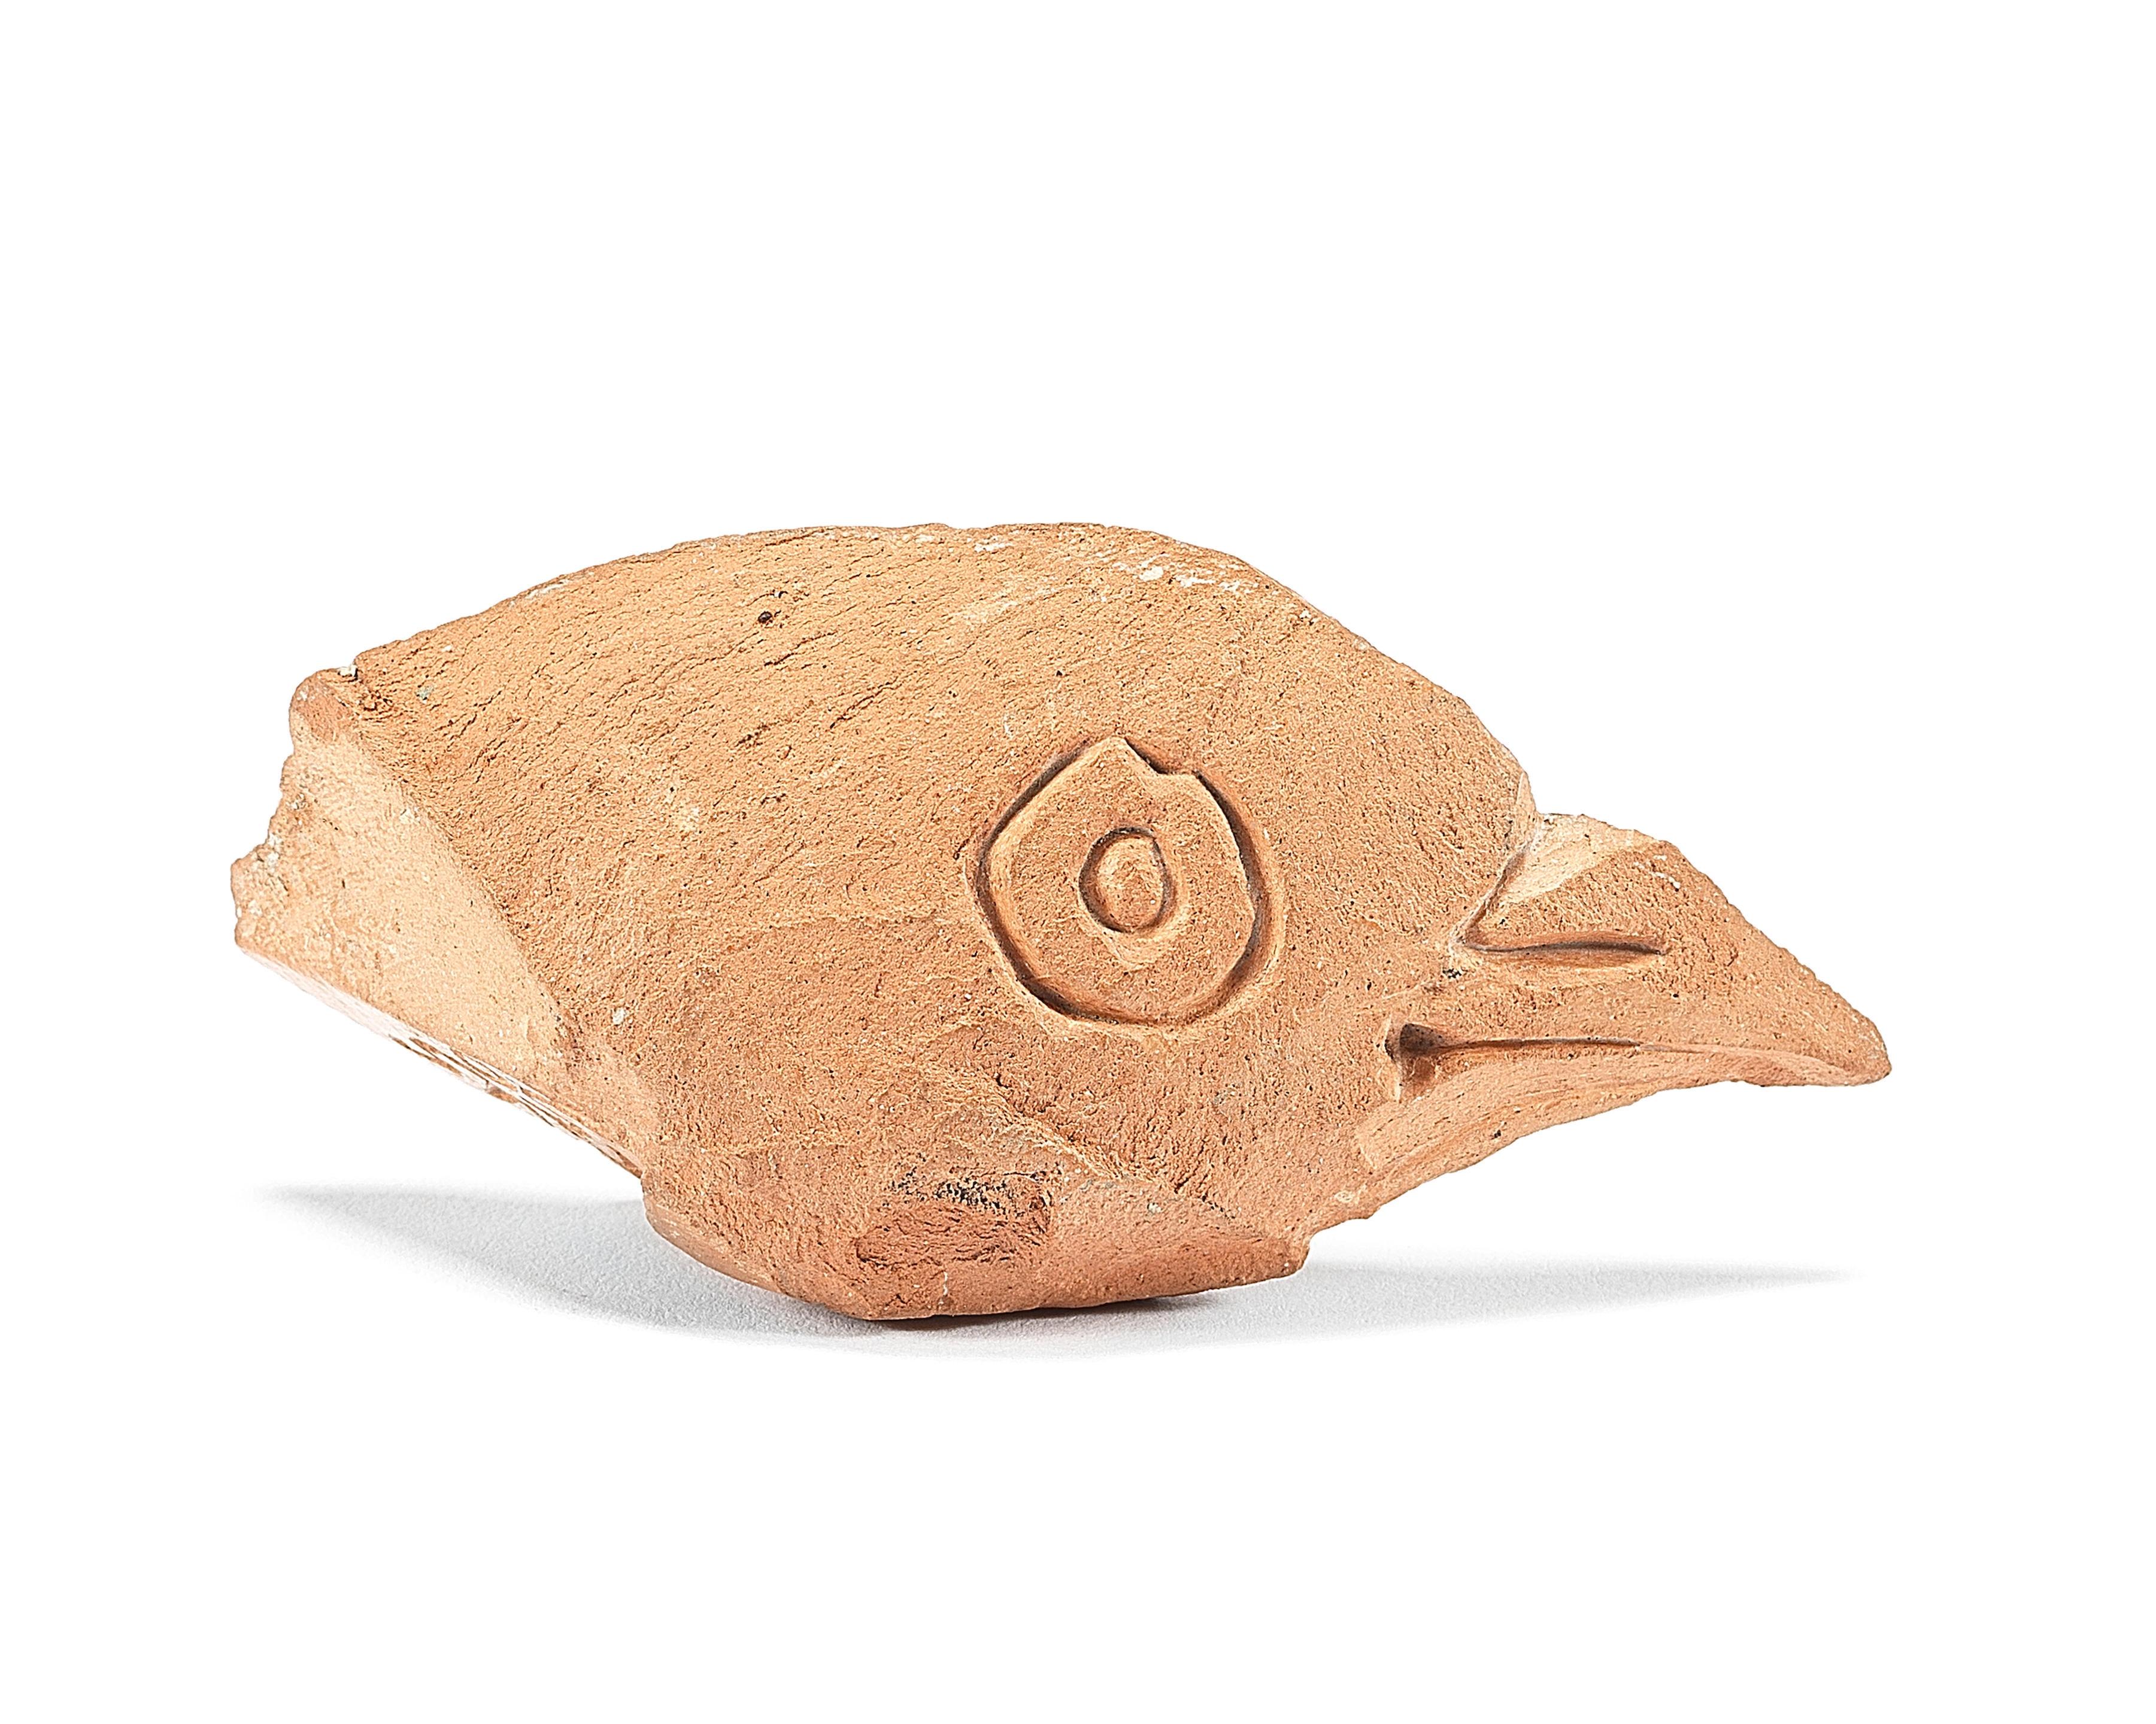 Tête d'oiseau, Pablo Picasso, Unique work, Terracotta, 1950's, Sculpture, Bird

1950
Unique work
Terracotta
H. 9 cm
Located and dated underside : Vallauris Juillet 50
Authentification has been confirmed by Claude Ruiz-Picasso.

Provenance :